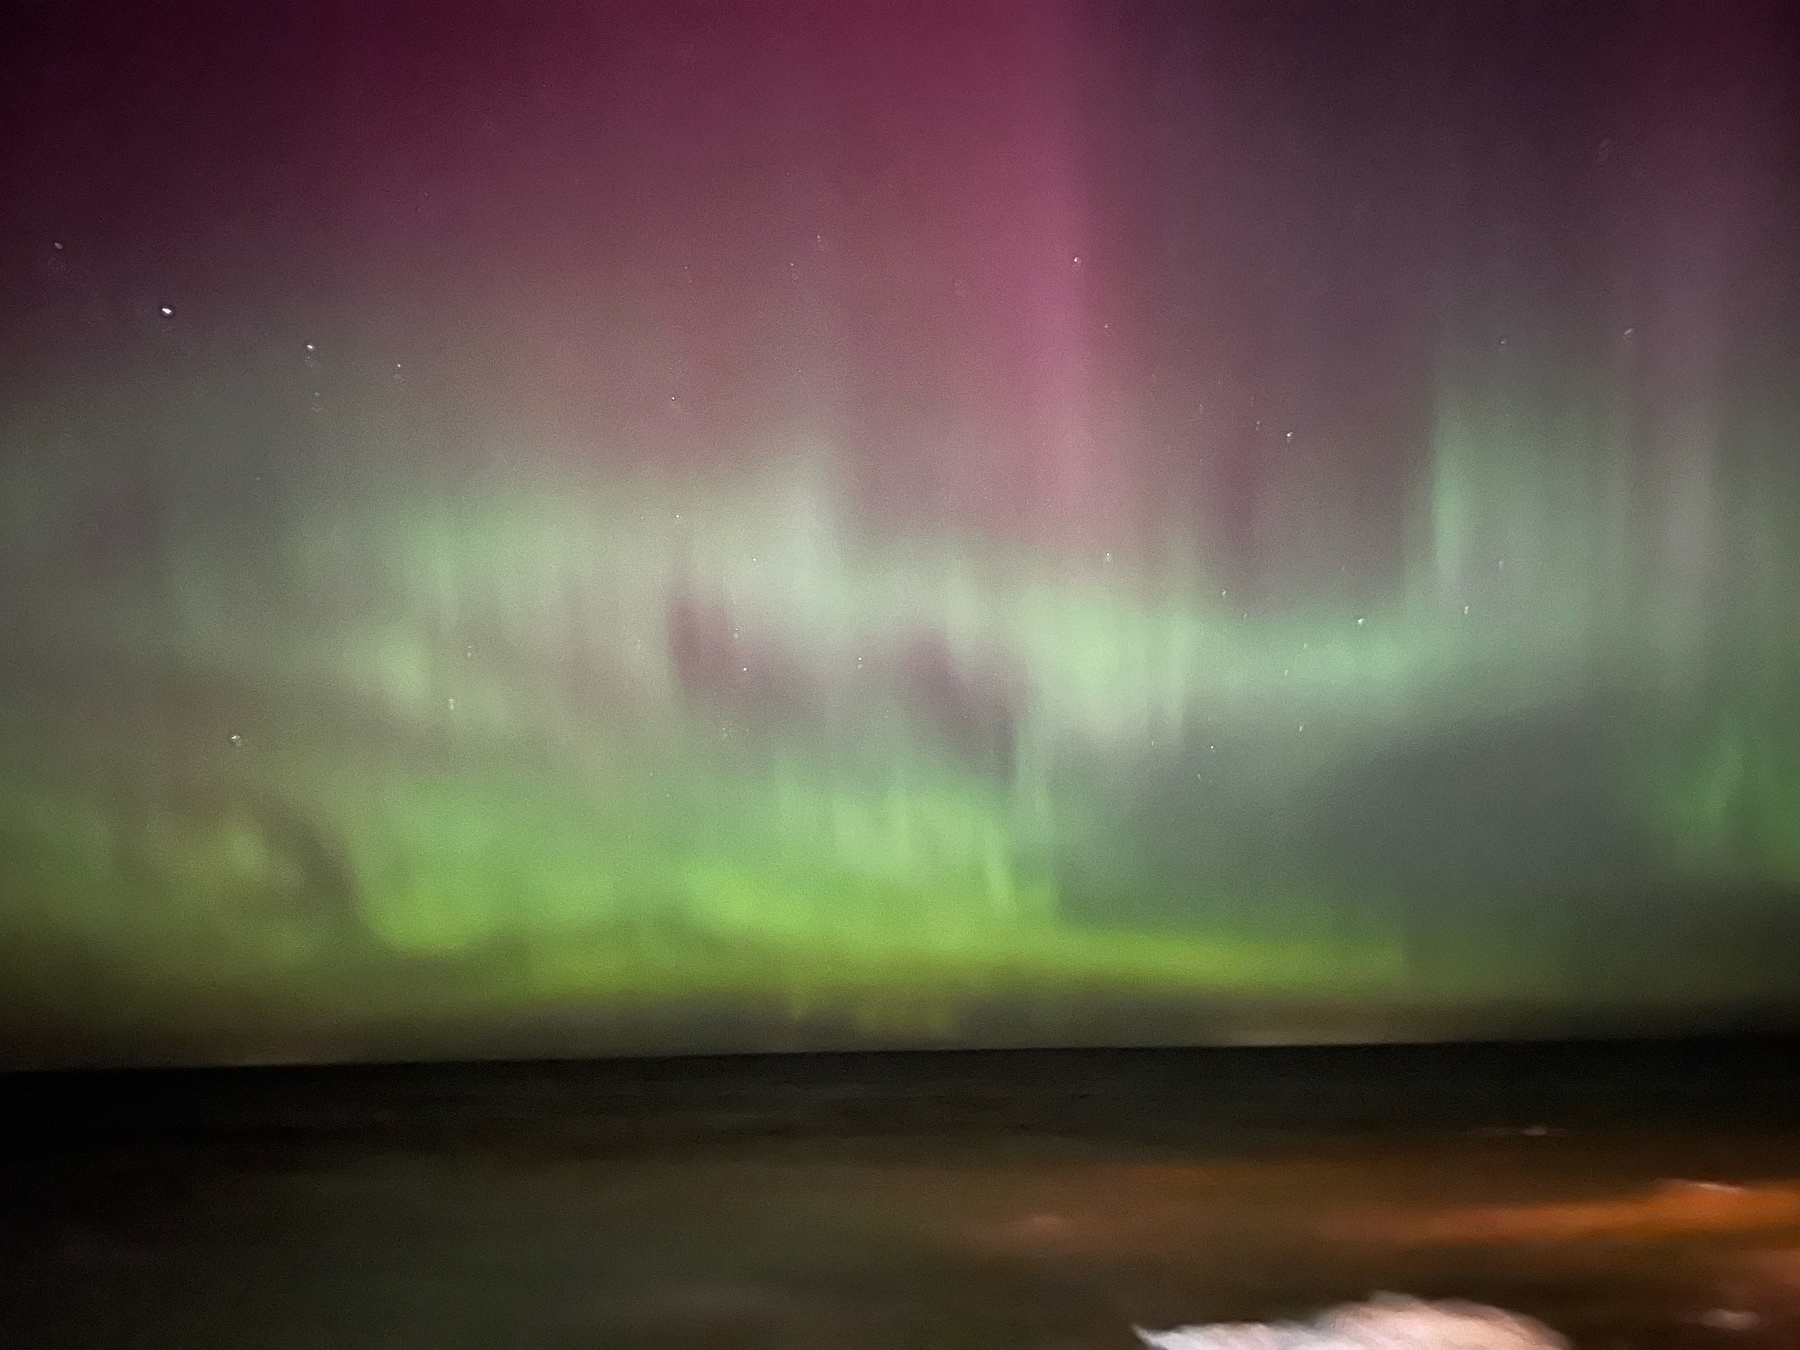 The Northern lights (aurora borealis) provided a nighttime show over Lake Ontario on March 23, and SUNY Oswego students and faculty were among those documenting the phenomenon. Meteorology major Tommy Cerra was among those taking and sharing amazing photos of the event, including this selection over Lake Ontario.